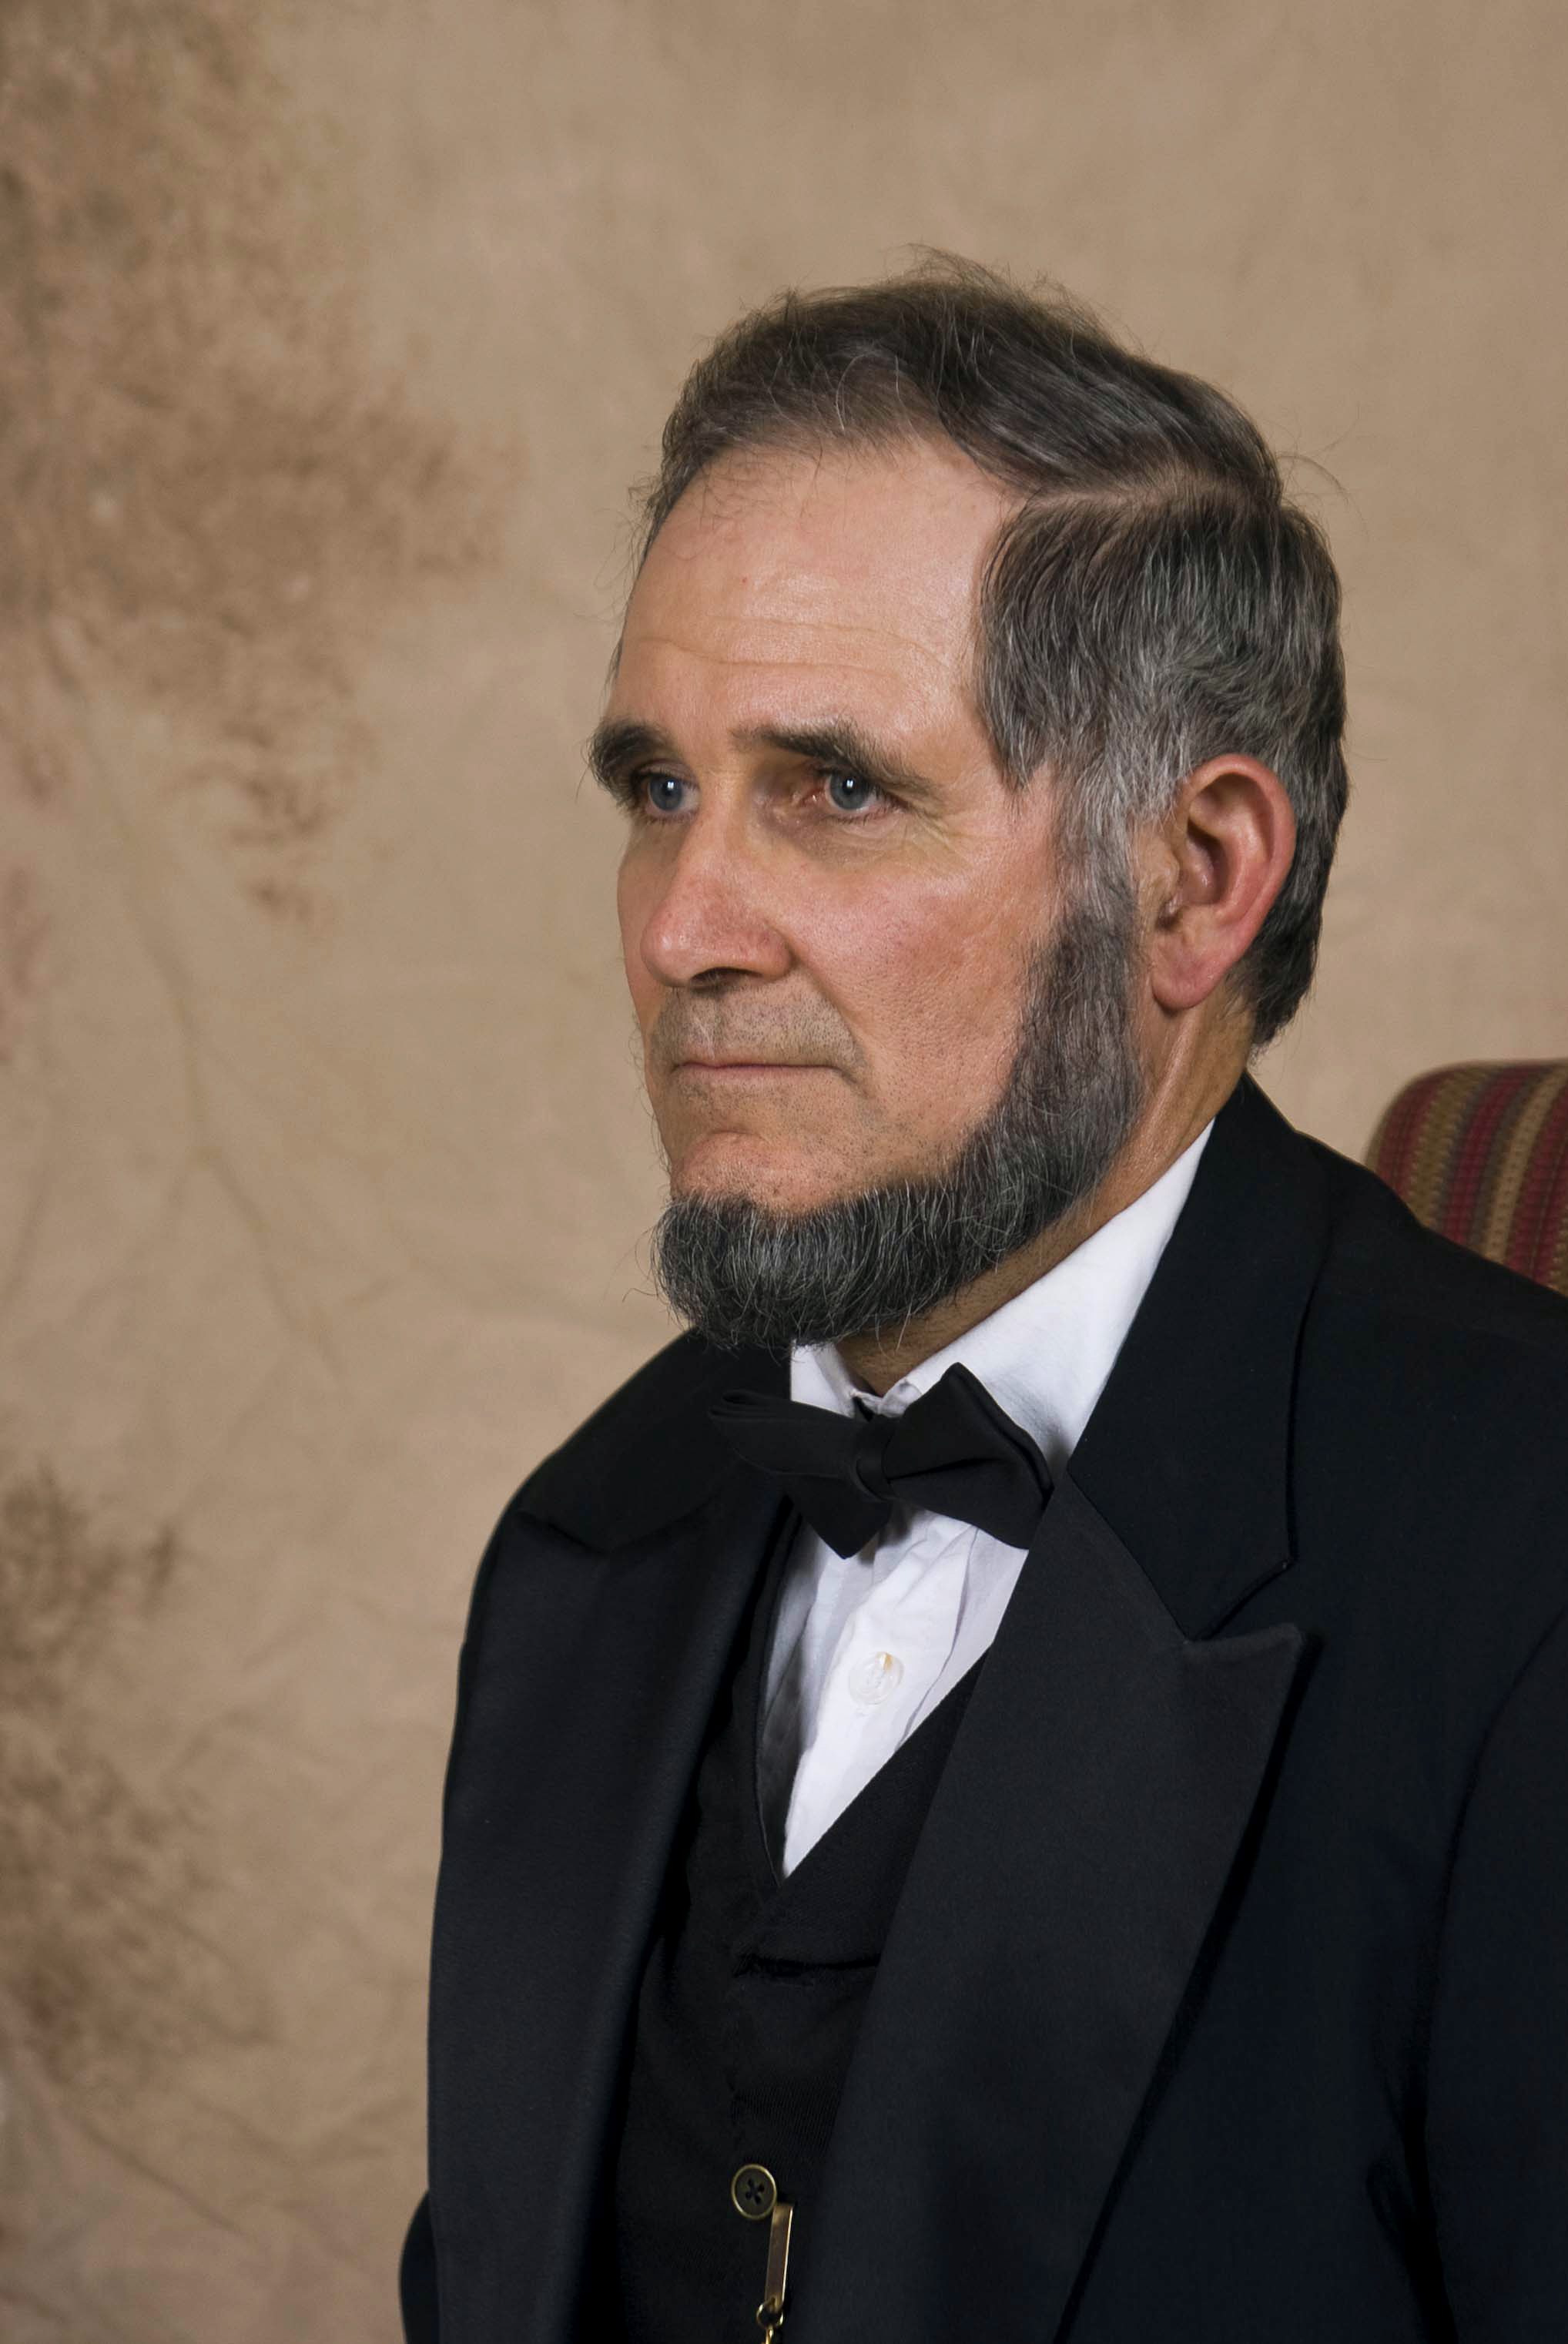 Abe Lincoln Presidential Protection